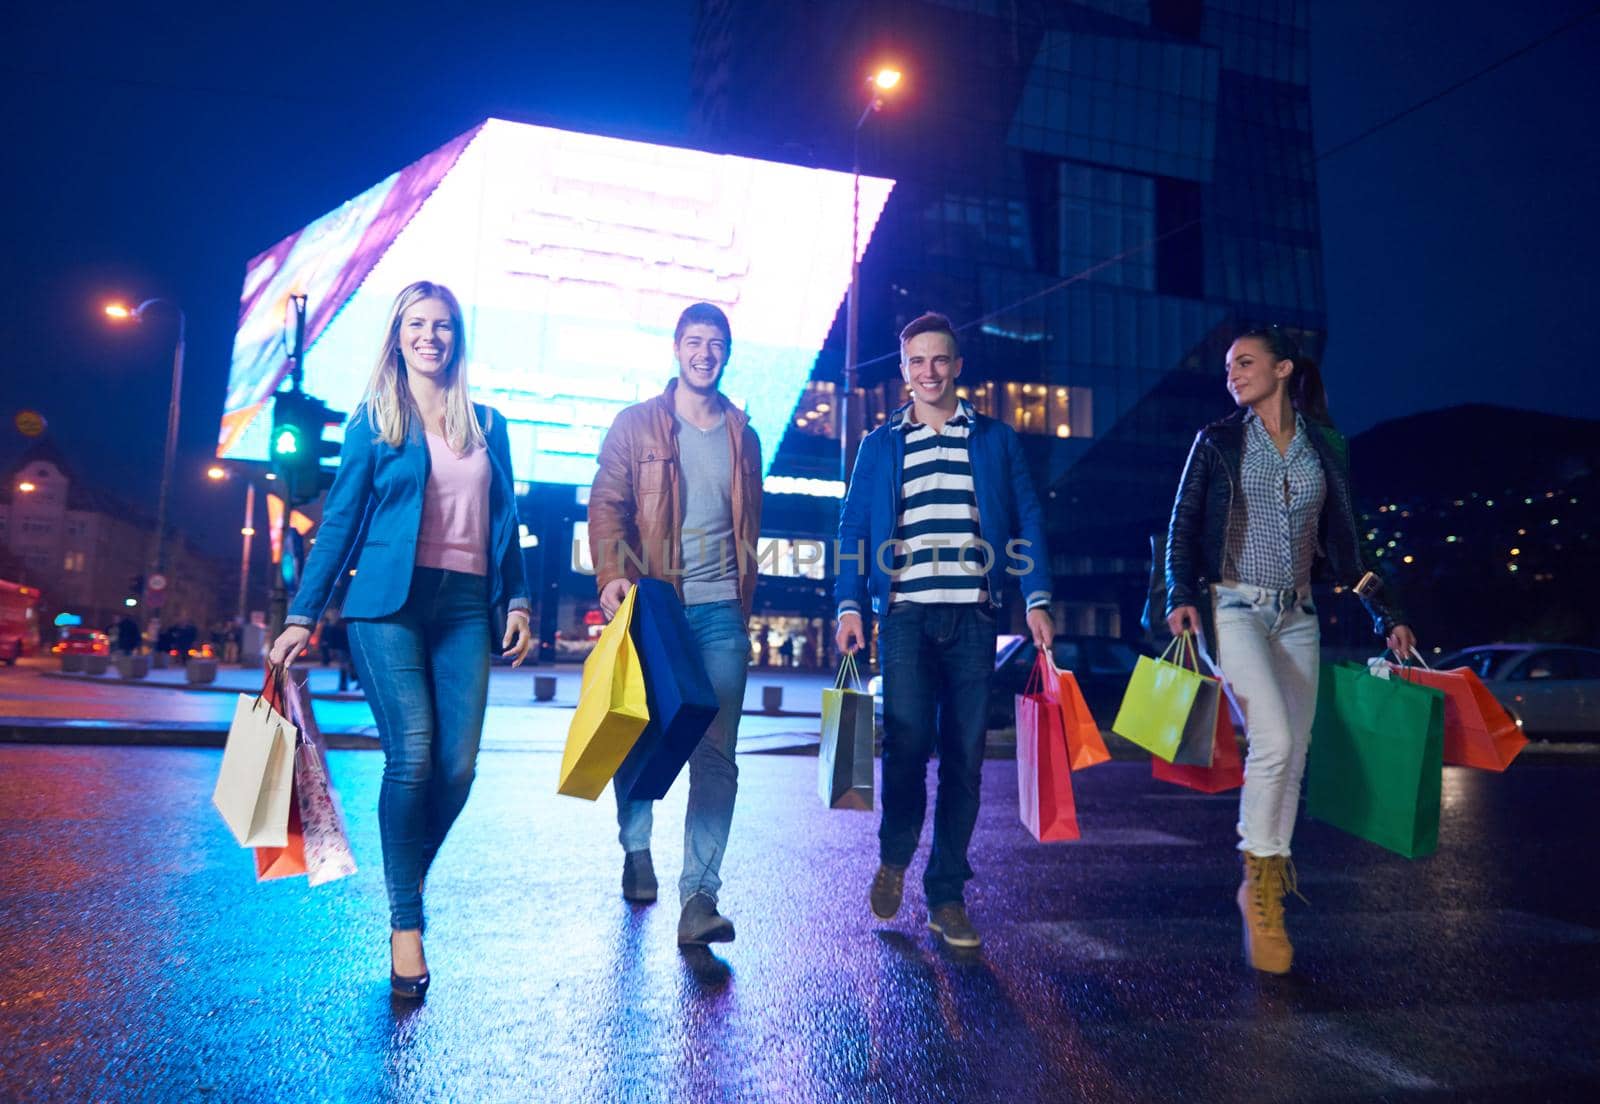 Group Of Friends Enjoying Shopping Trip Together
group of happy young frineds enjoying shopping night and walking on steet on night in with mall in background